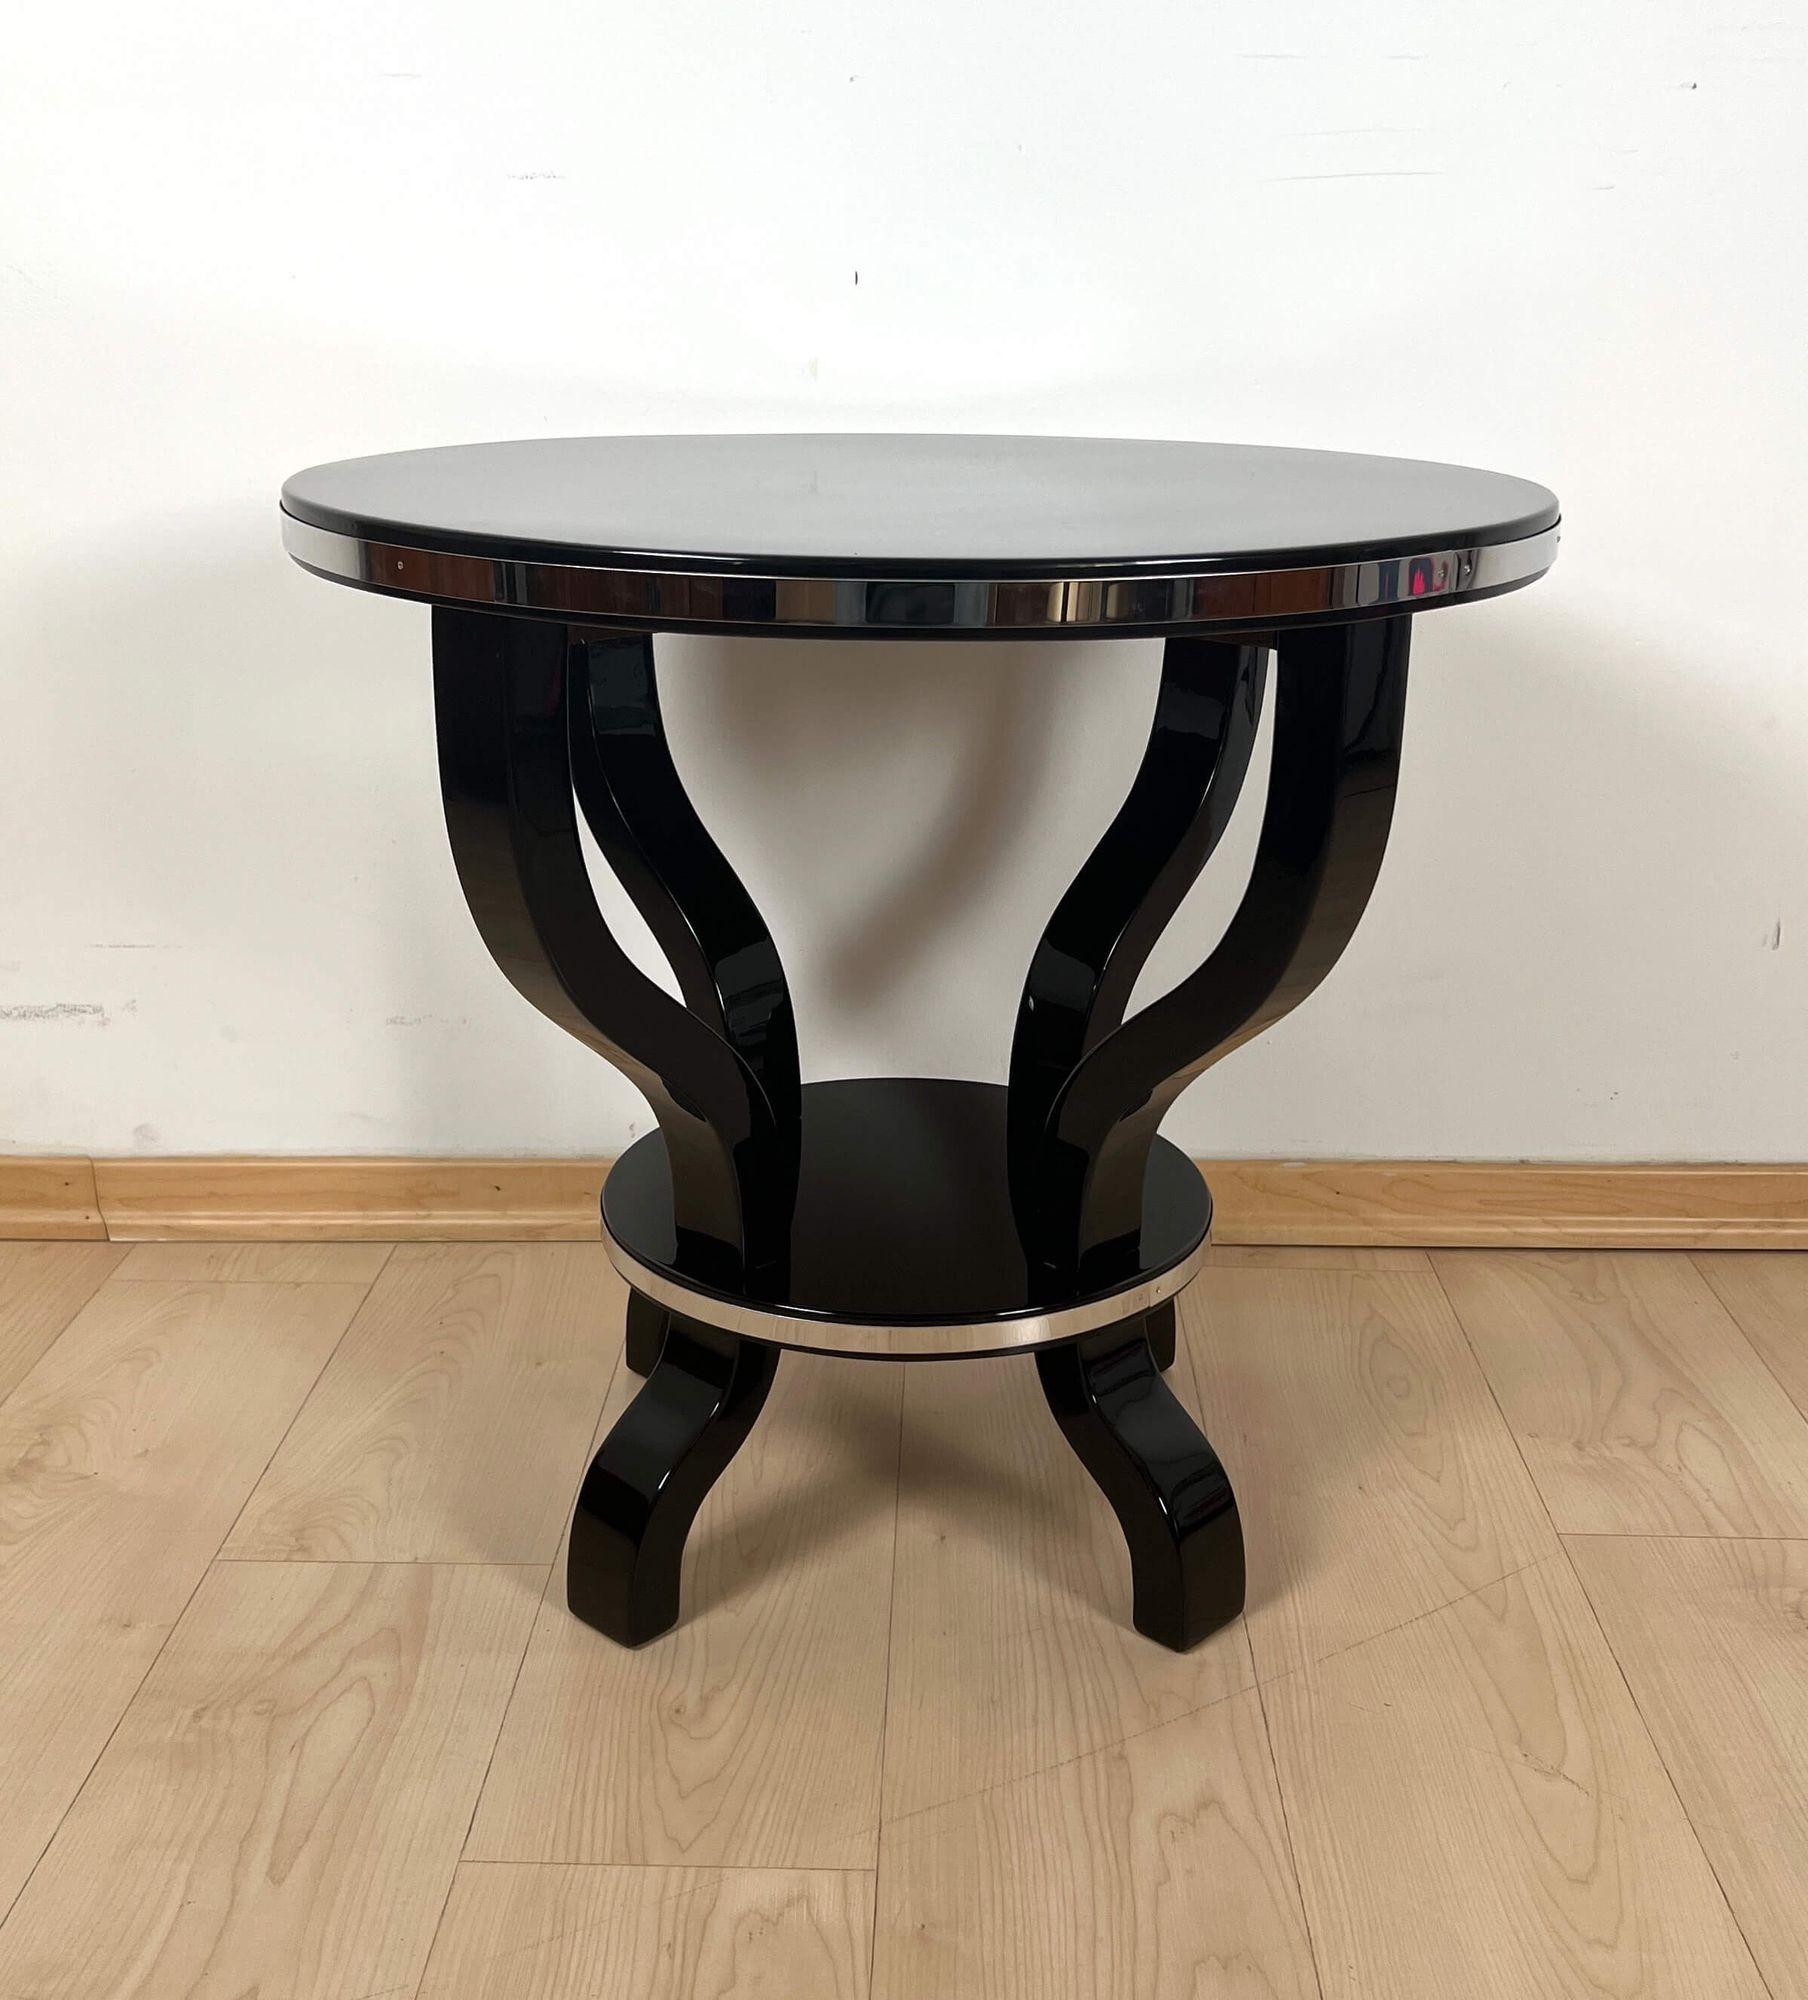 Original Art Deco round four-legged side table or gueridon.

* Wood, black lacquered with piano lacquer and polished to high gloss.
* Two polished stainless steel trims around top and intermediate tableau.
Dimensions: H 60 cm x Ø 60 cm.